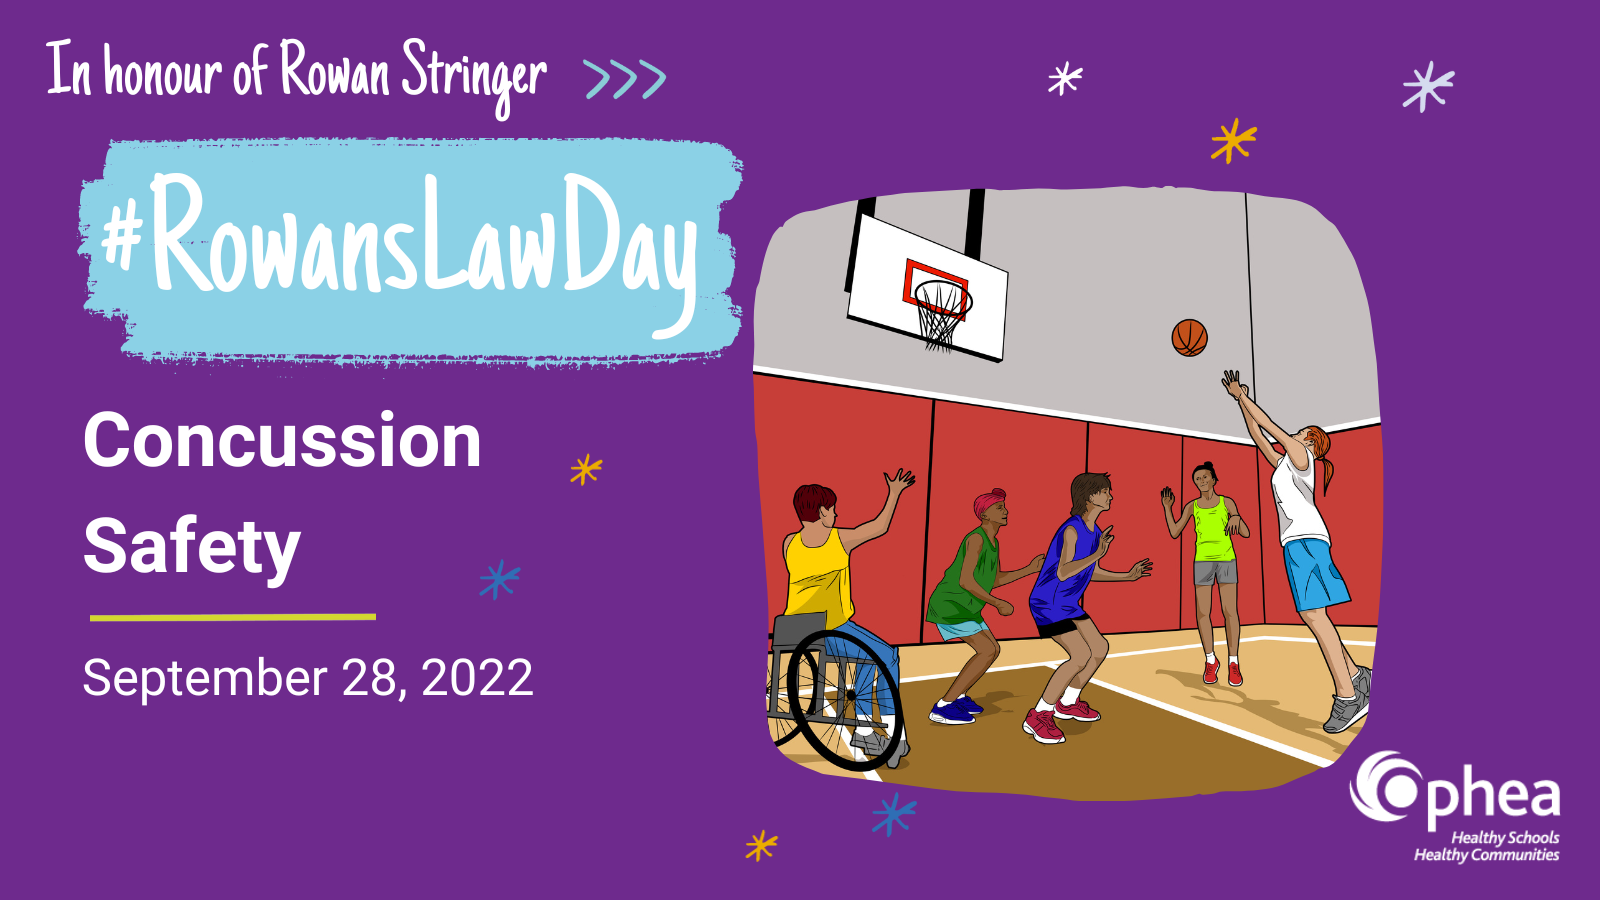 In honour of Rowan Stringer: Rowan's Law Day - Concussion Safety on September 28, 2022. Beside the text is an illustration of students playing basketball in a gym.